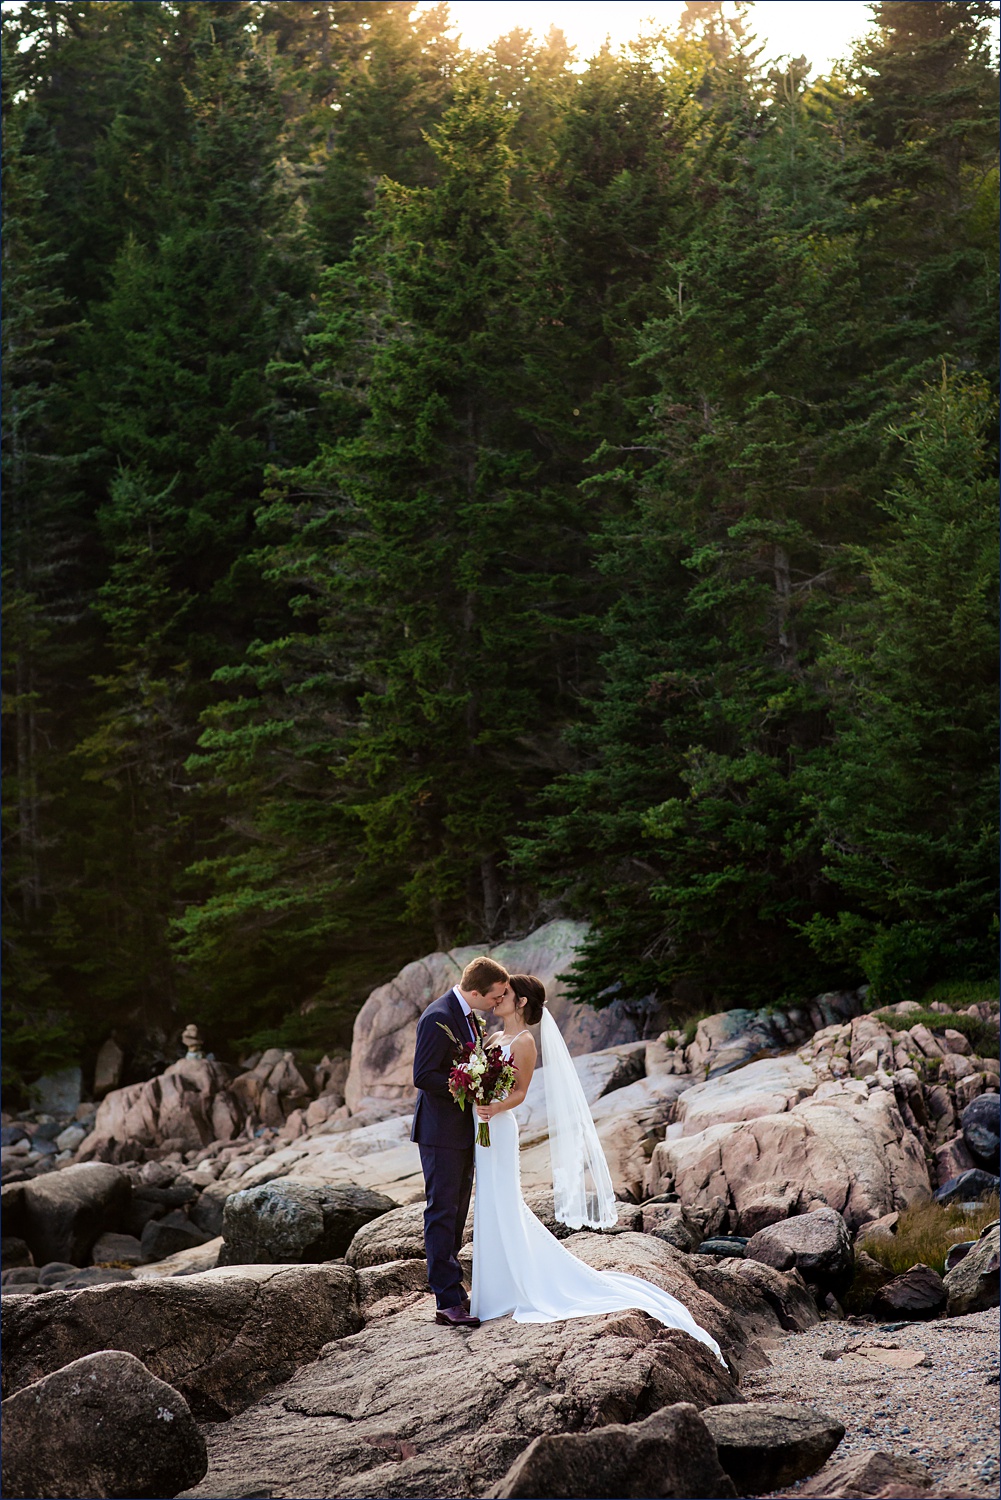 The newlyweds in front of the majestic coastal Maine woods